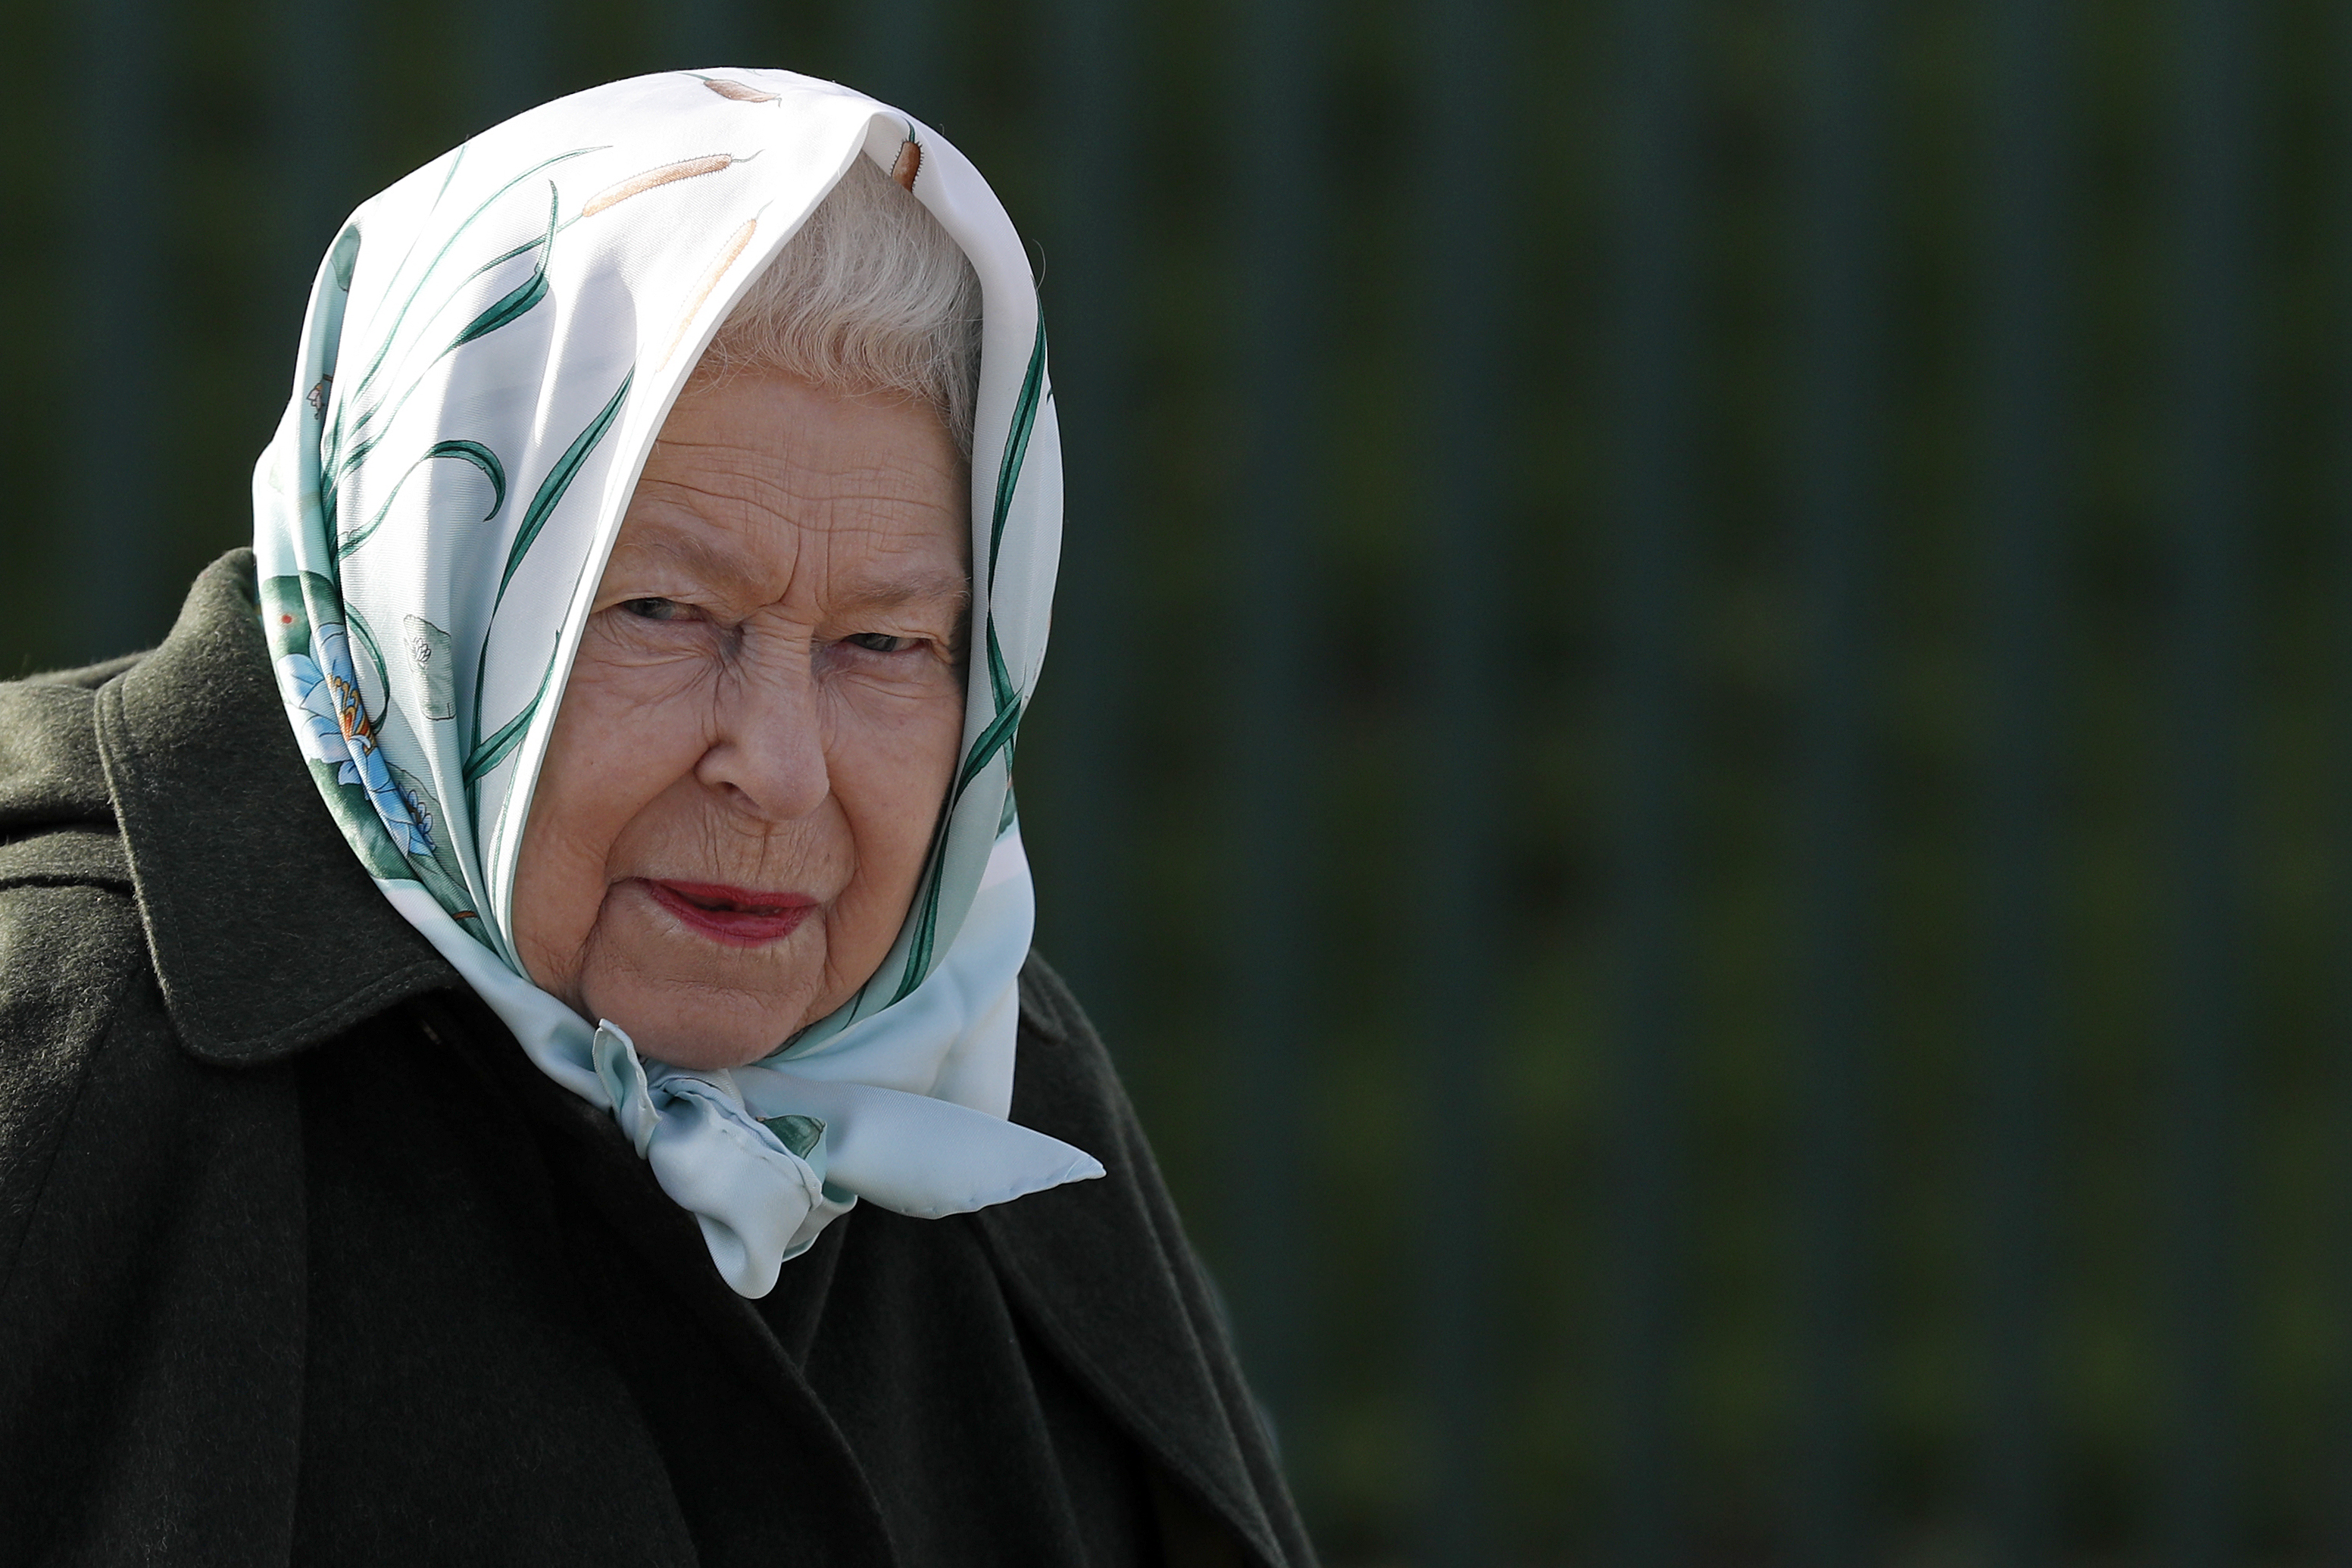 Why Queen Elizabeth II does not want Scotland to be independent, according to experts